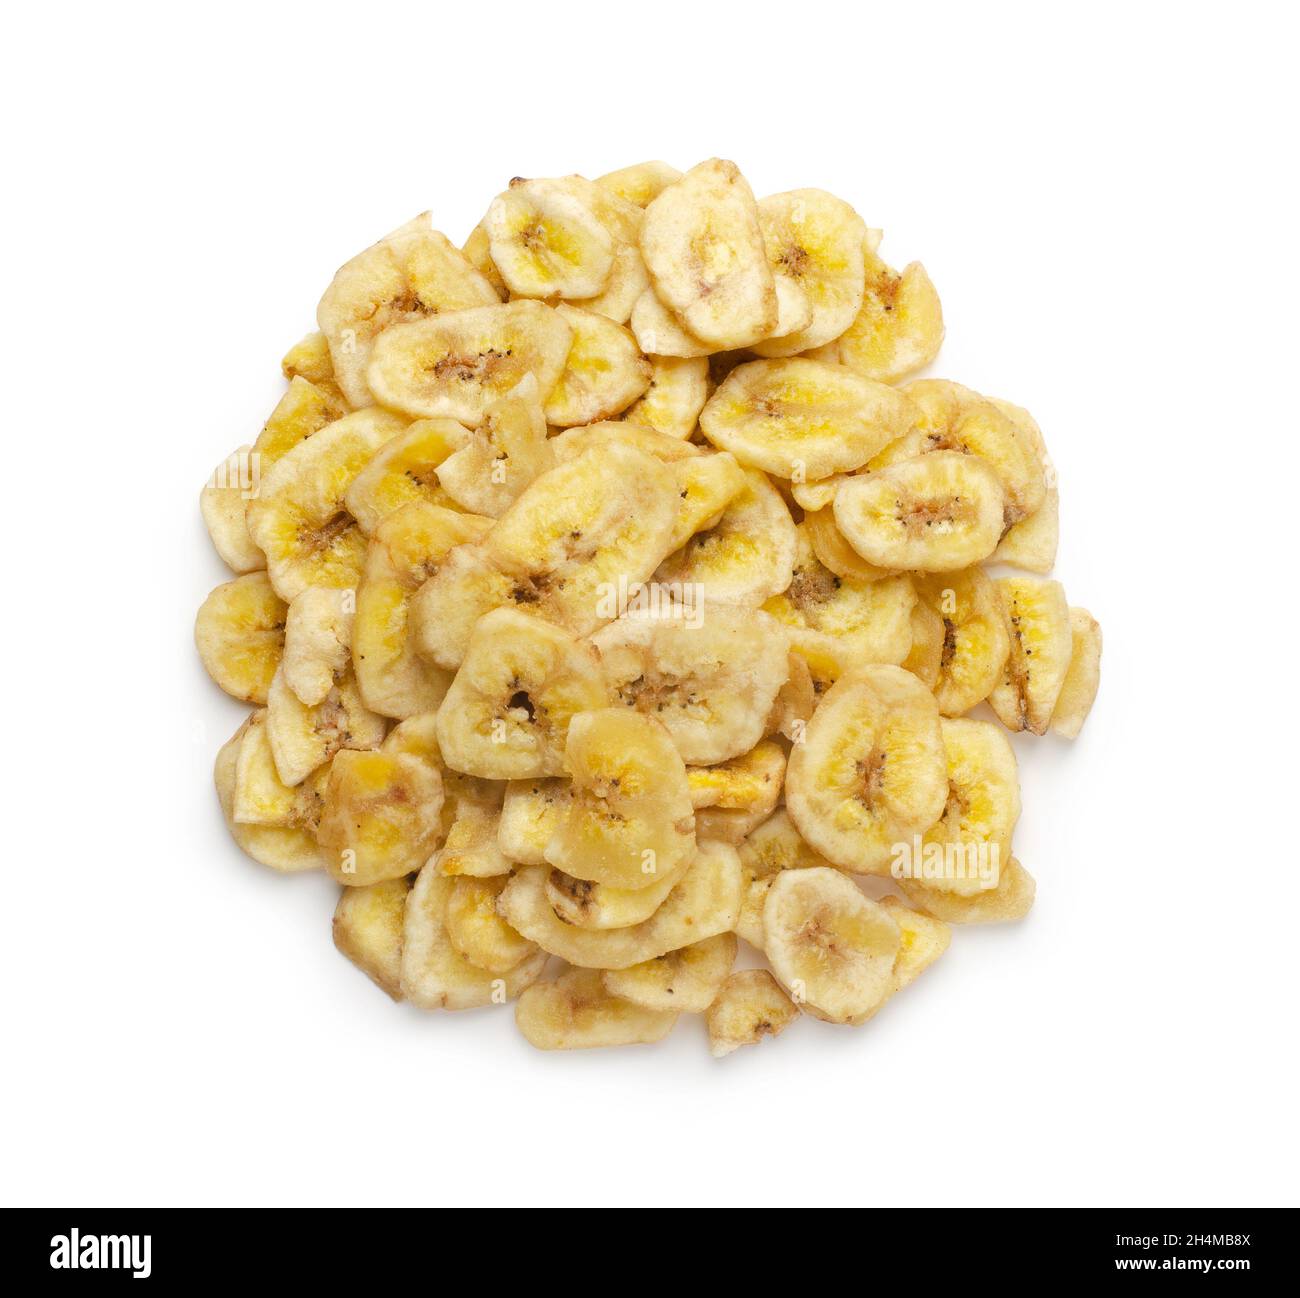 Banana chips isolated on a white background Stock Photo